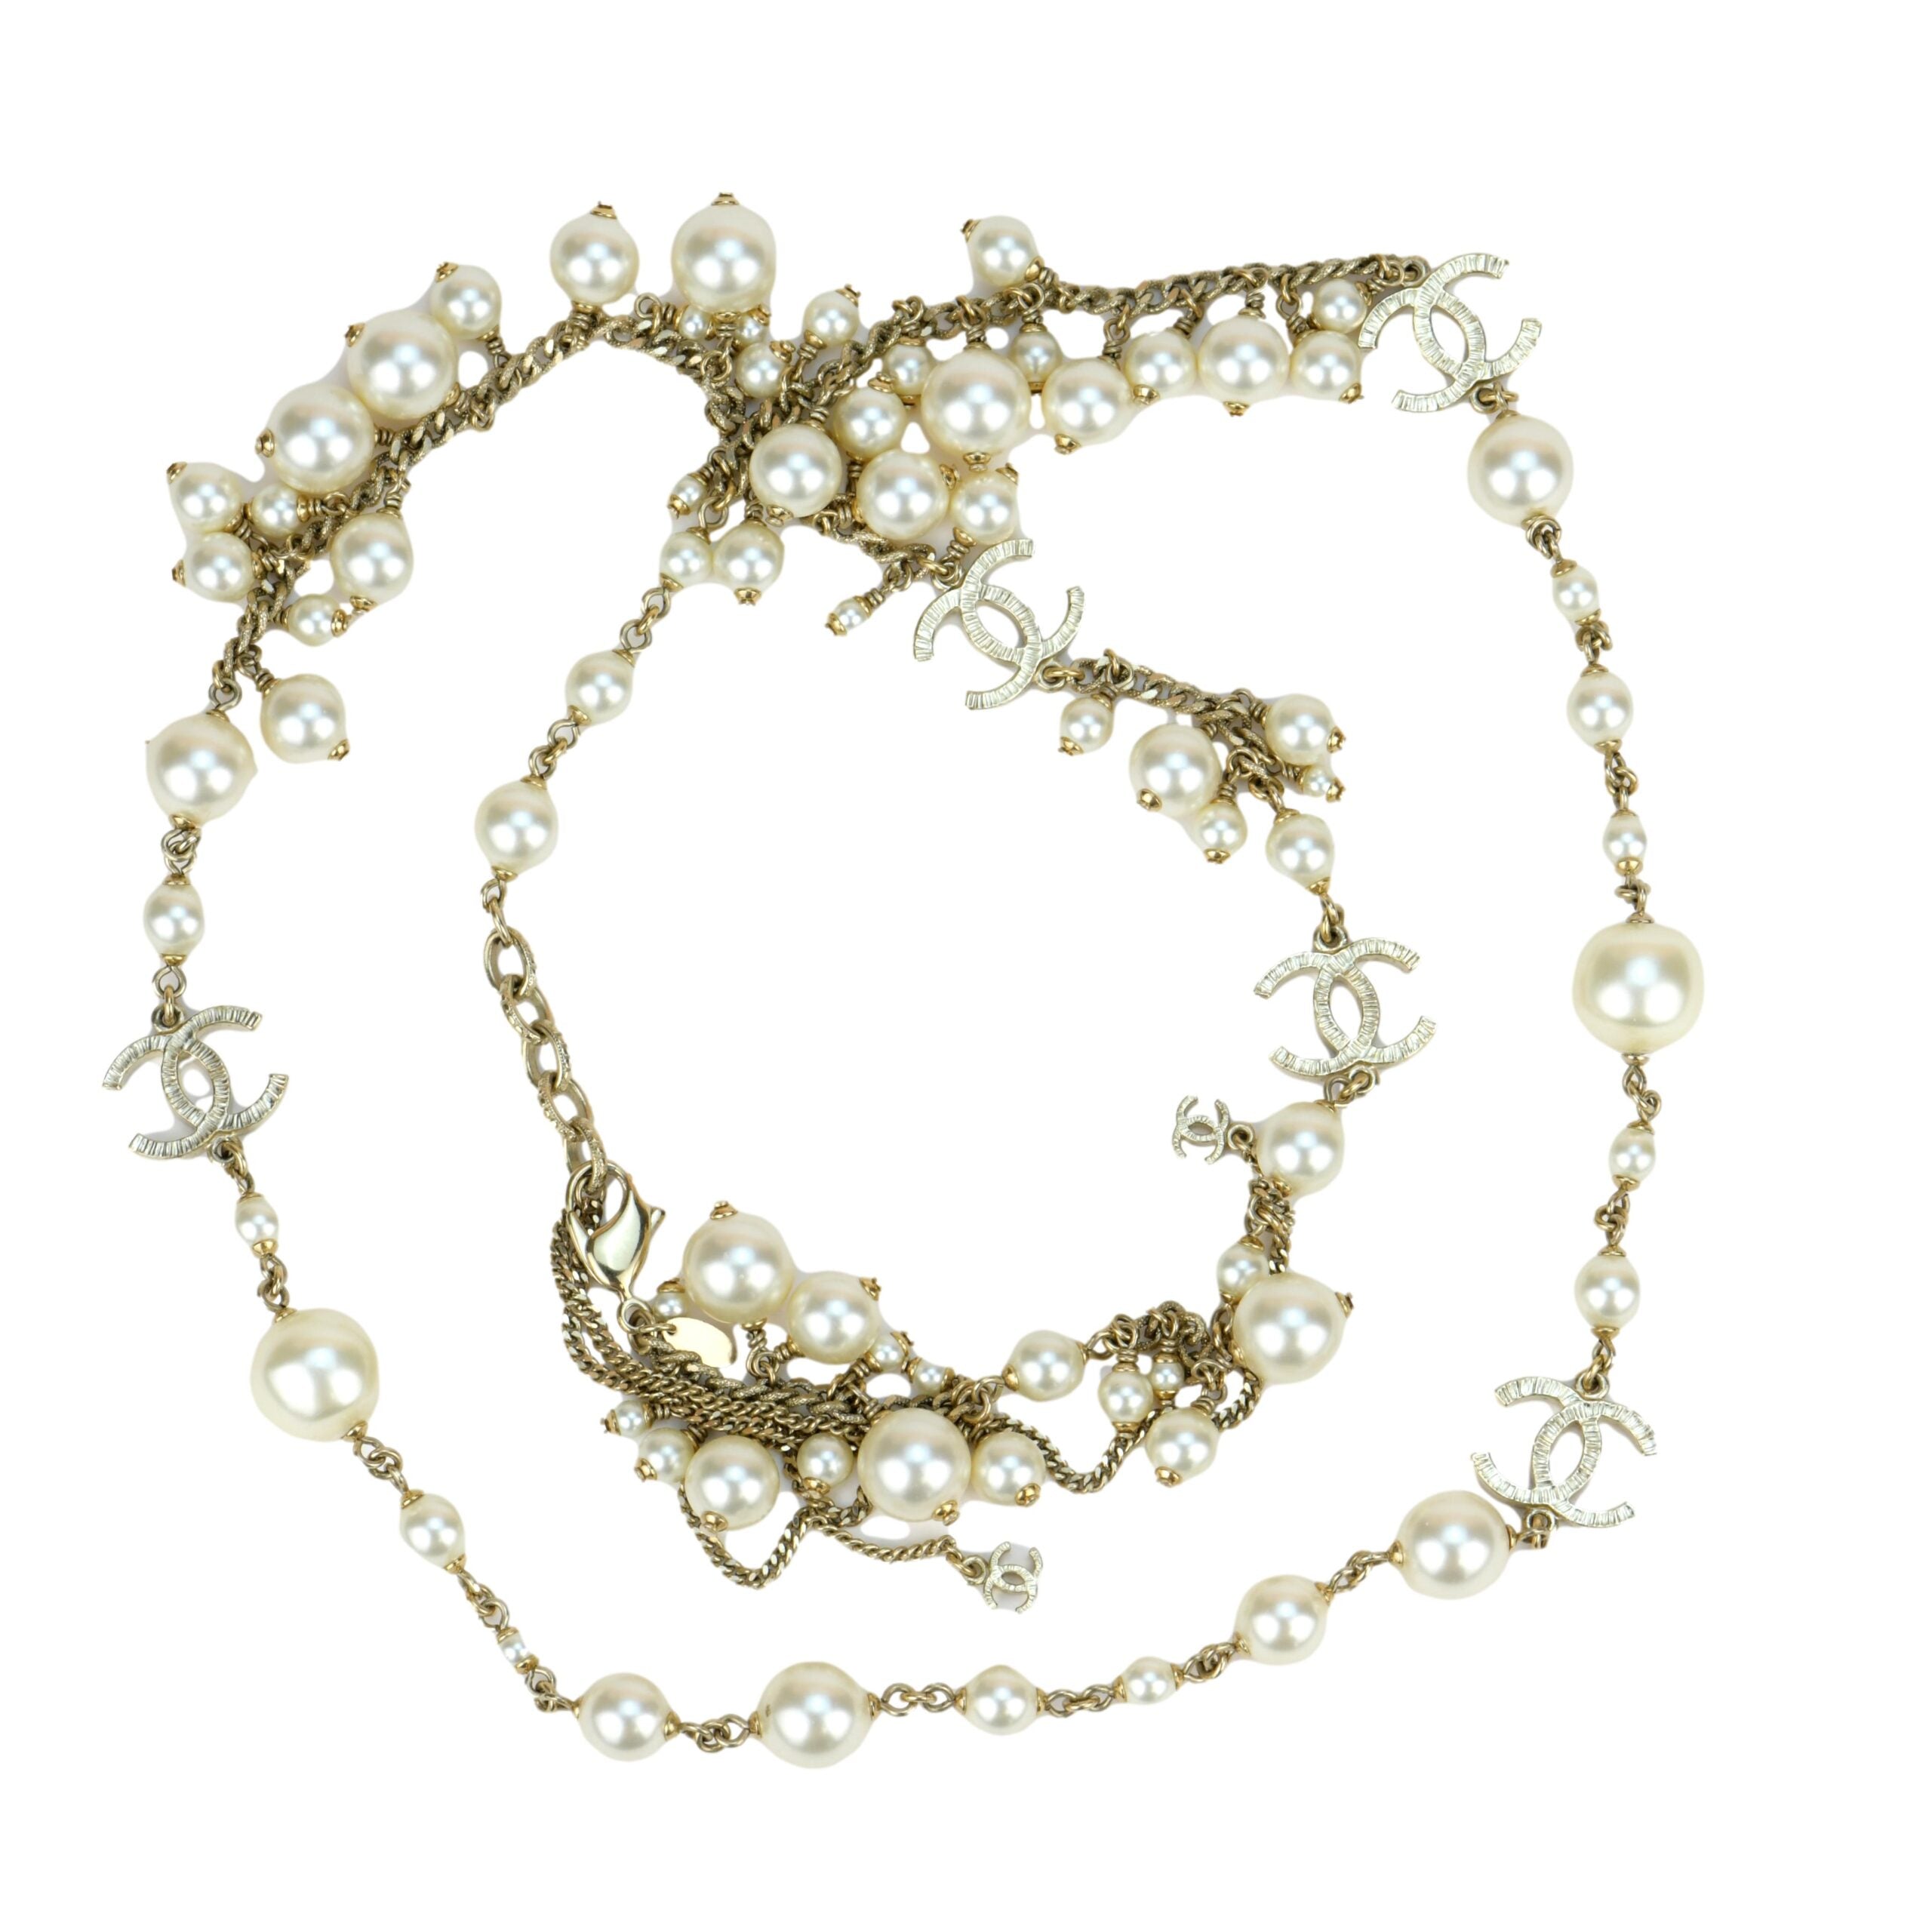 Faux Pearls on Textile Cord Necklaces - Large – Jianhui London